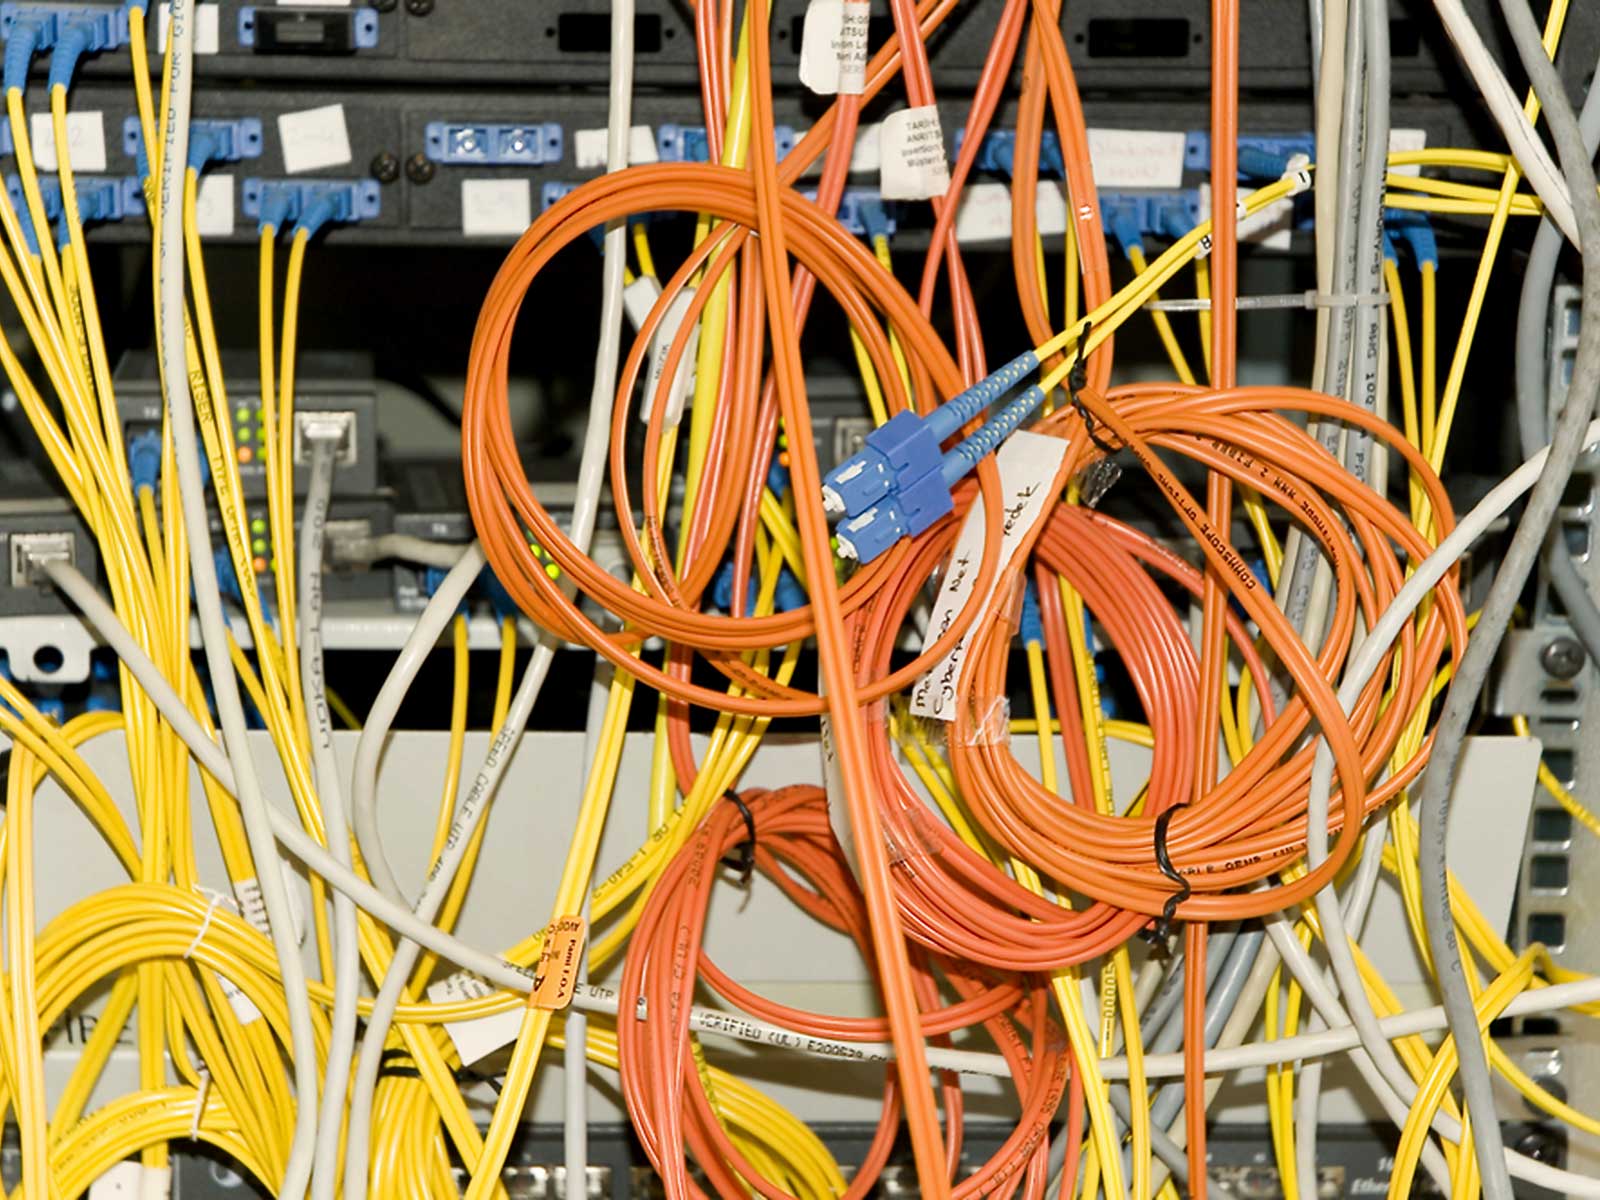 network cabling and wiring